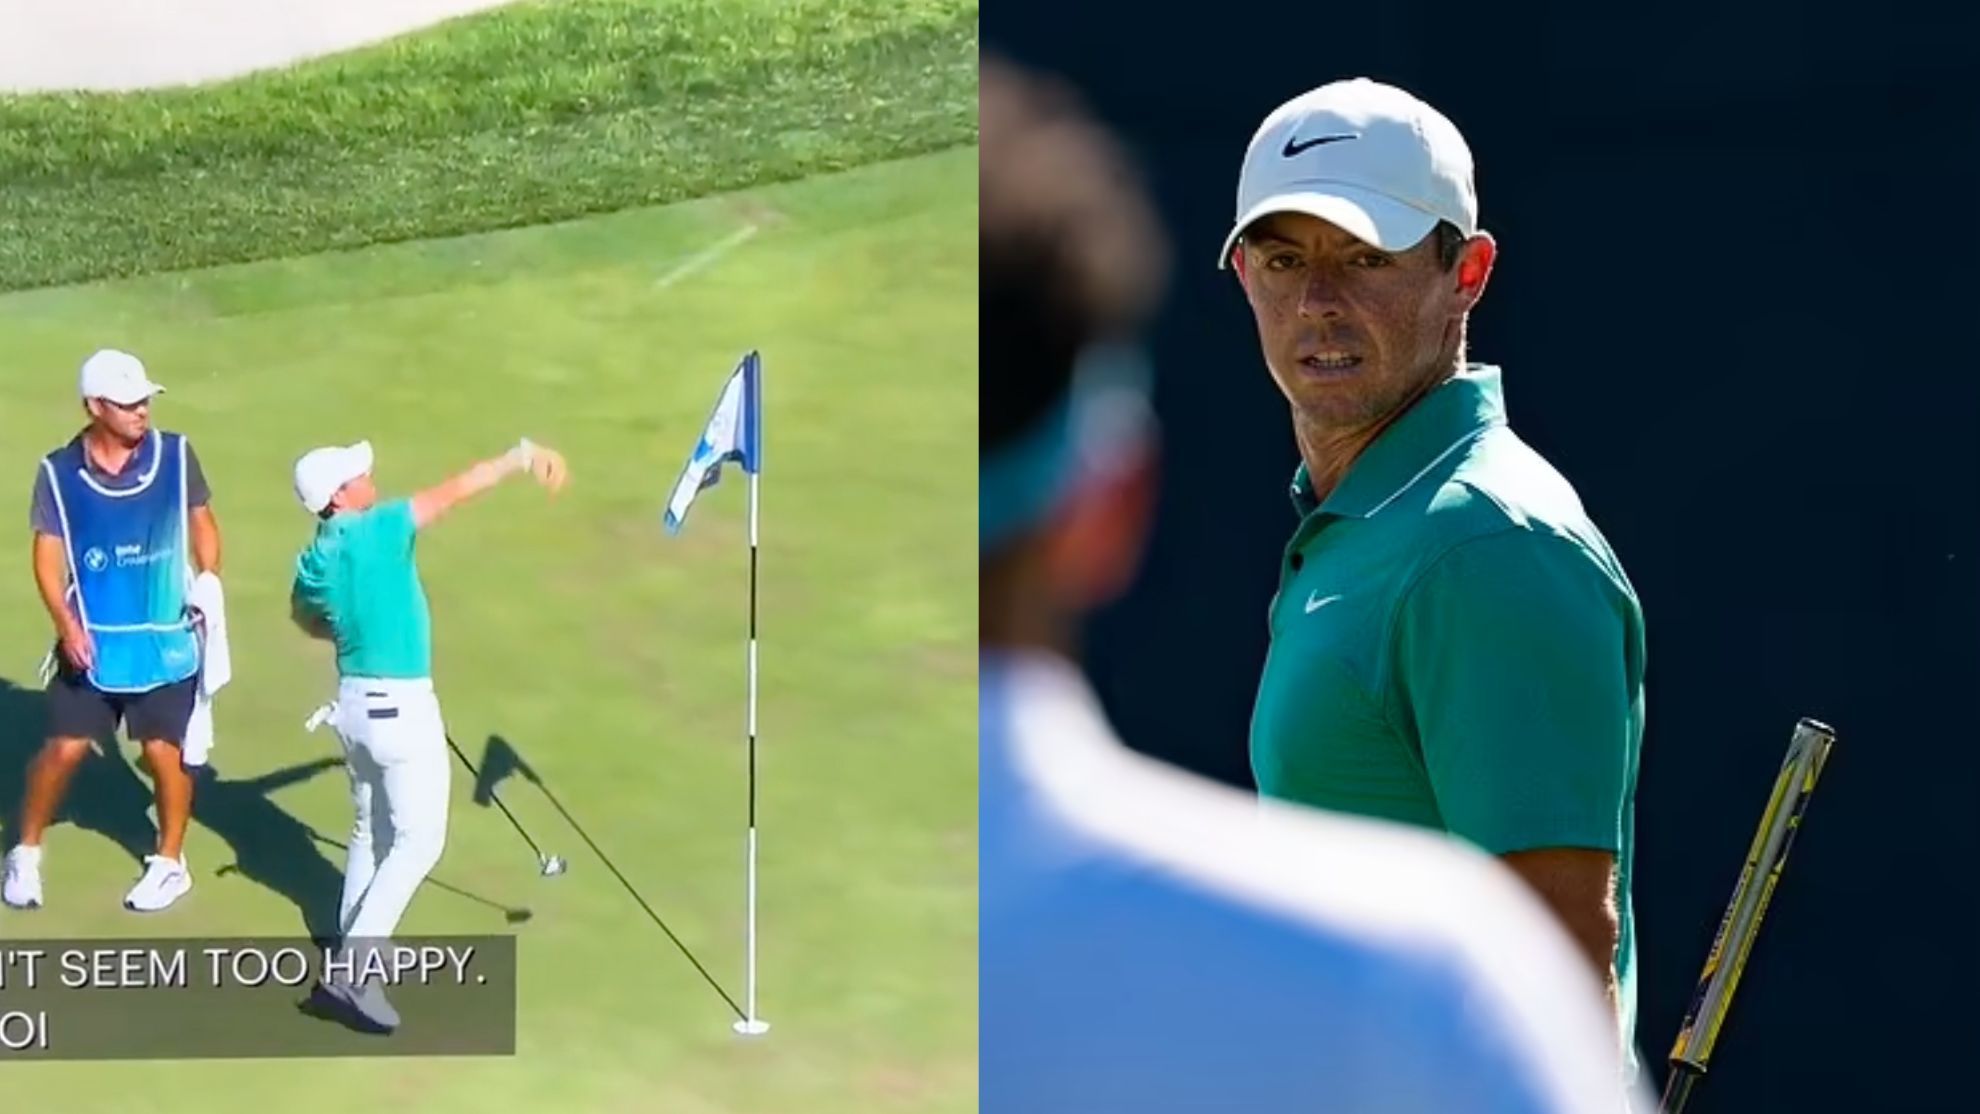 Rory McIlroy proceeds to throw a fan's remote control golf ball into a nearby pond and then stares his down.